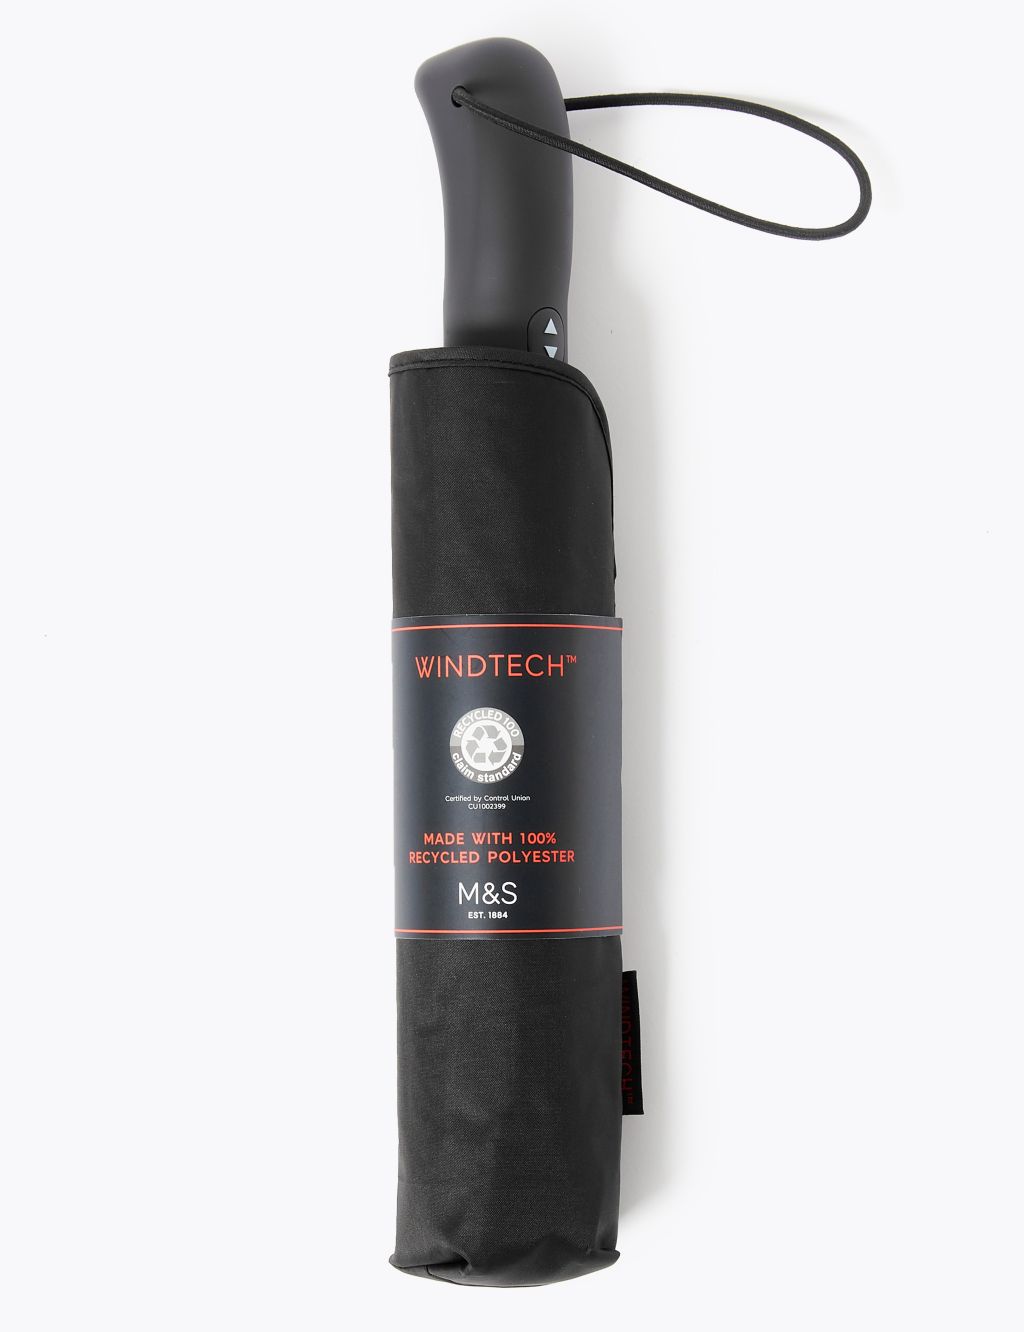 Recycled Polyester Rubber Handle Umbrella with Windtech™ image 4